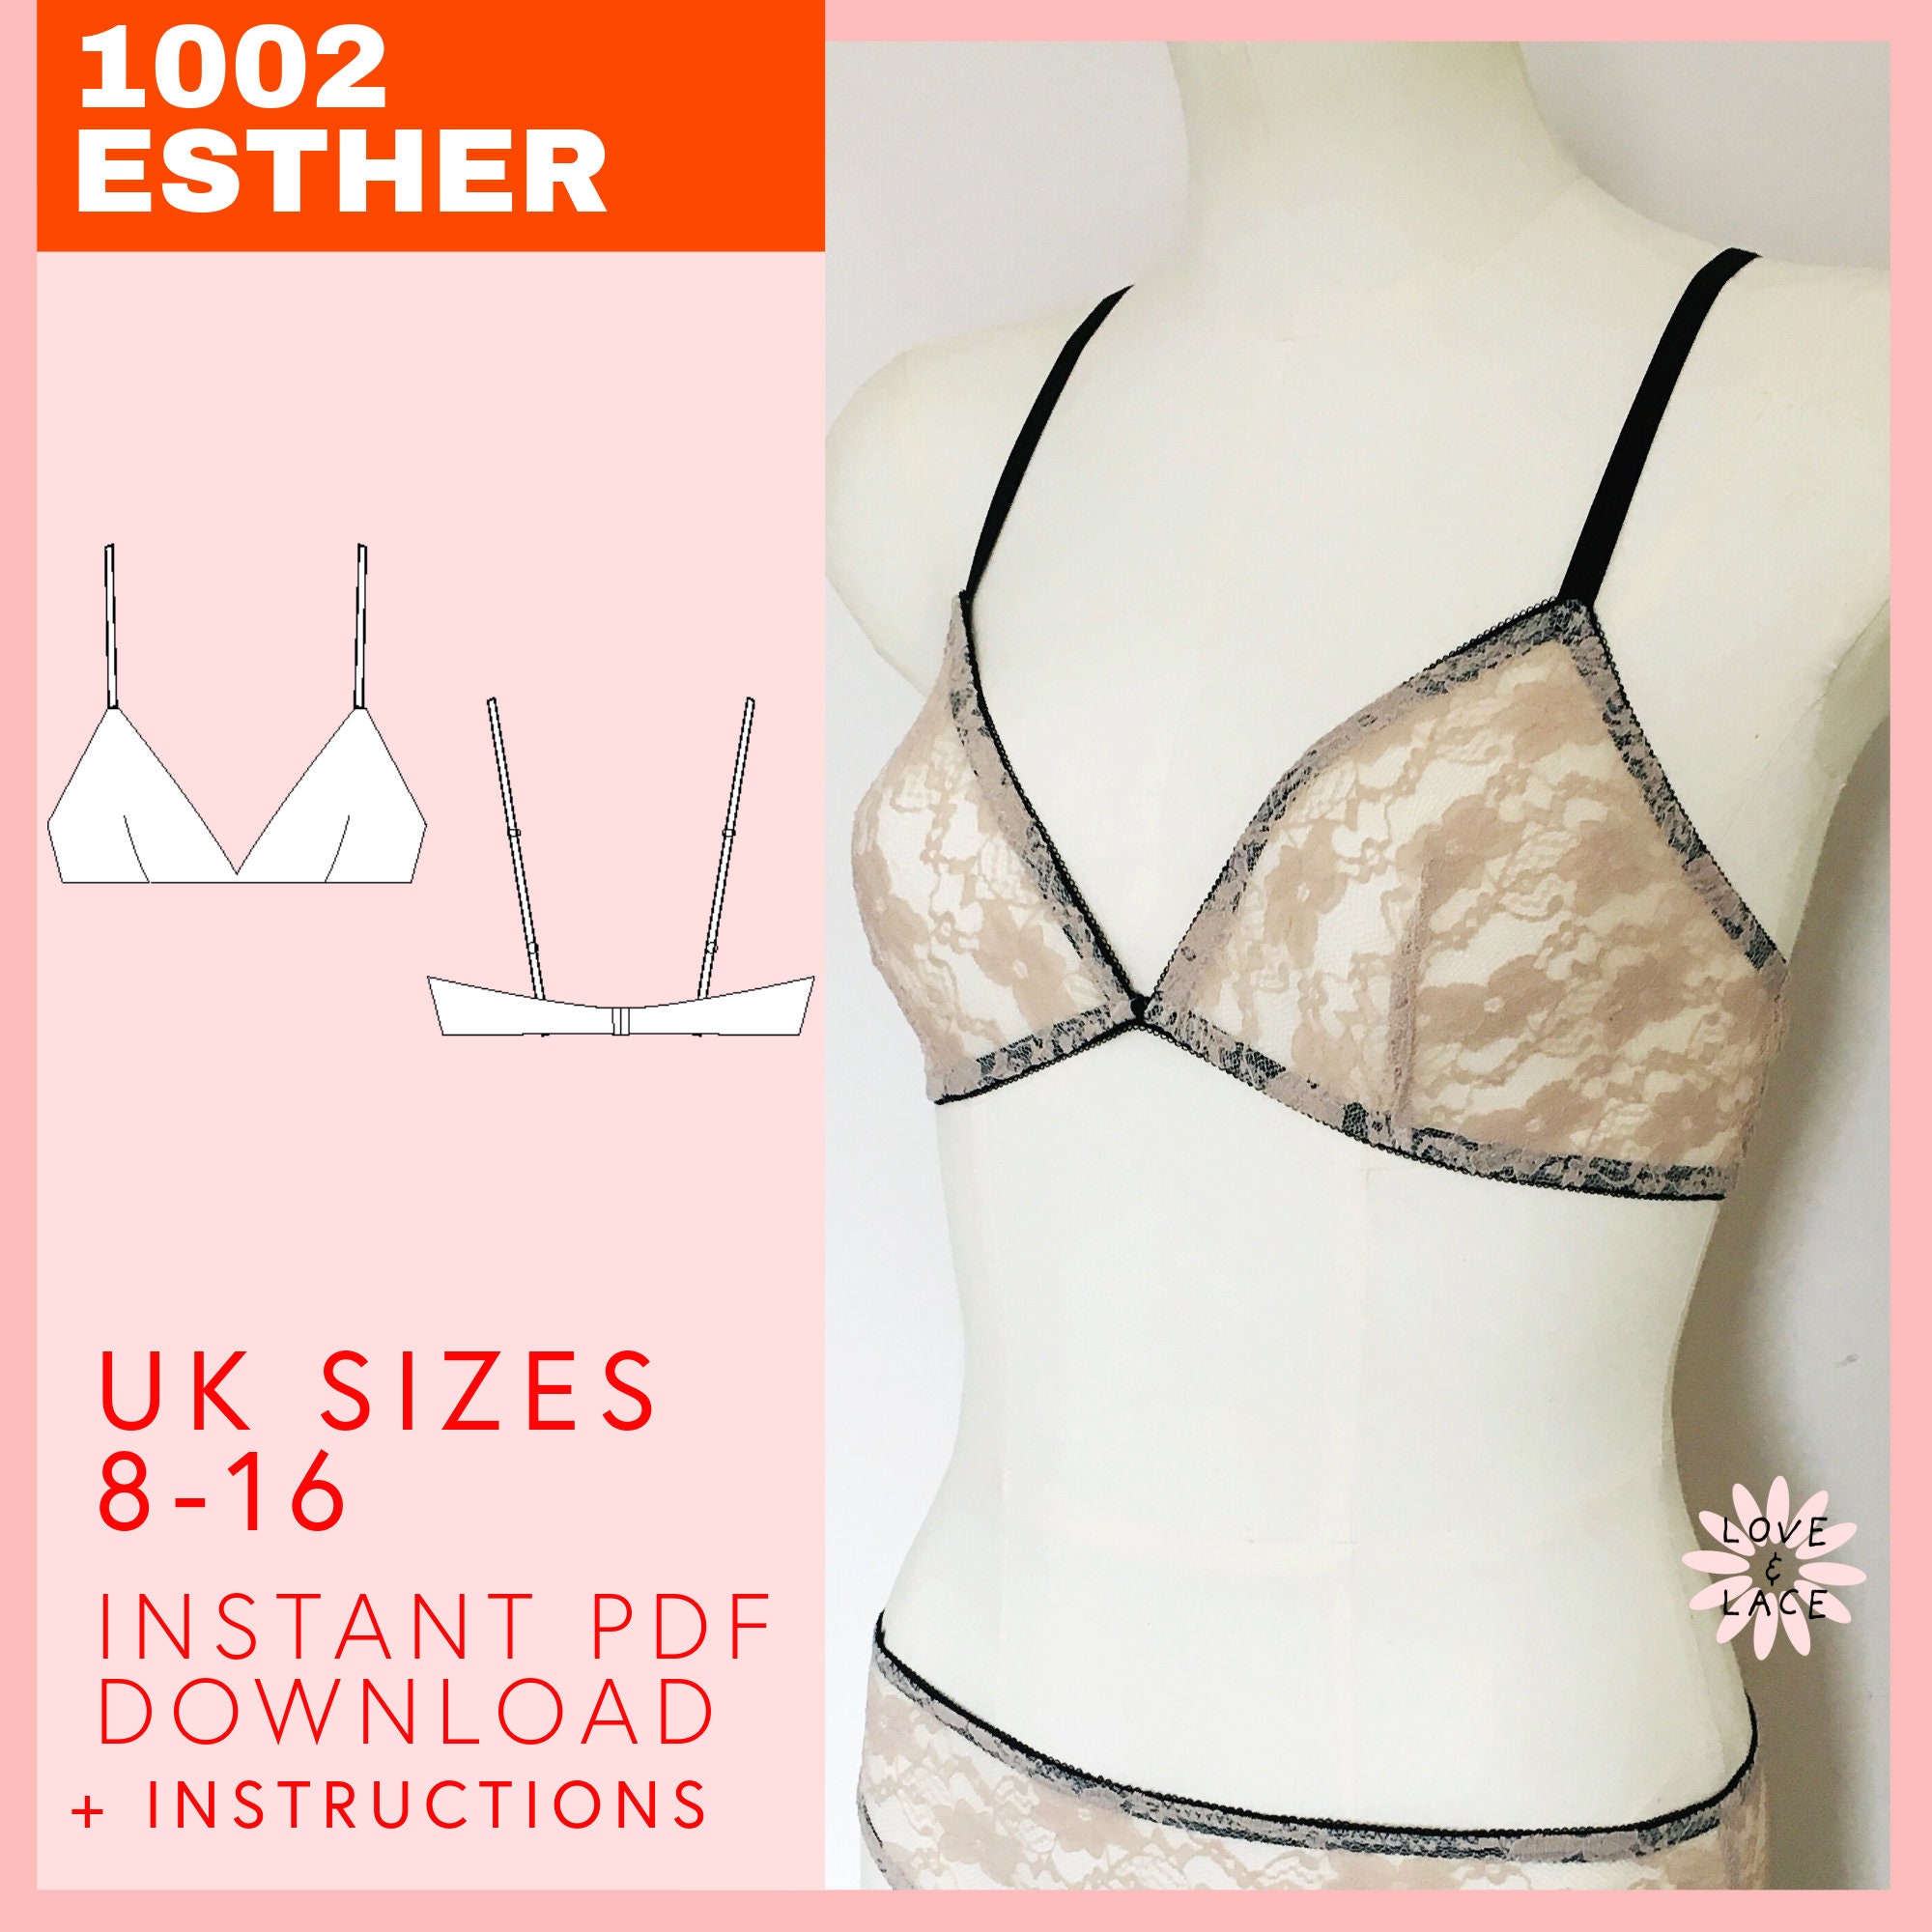 LINGERIE SEWING PATTERNS – Sophie Hines